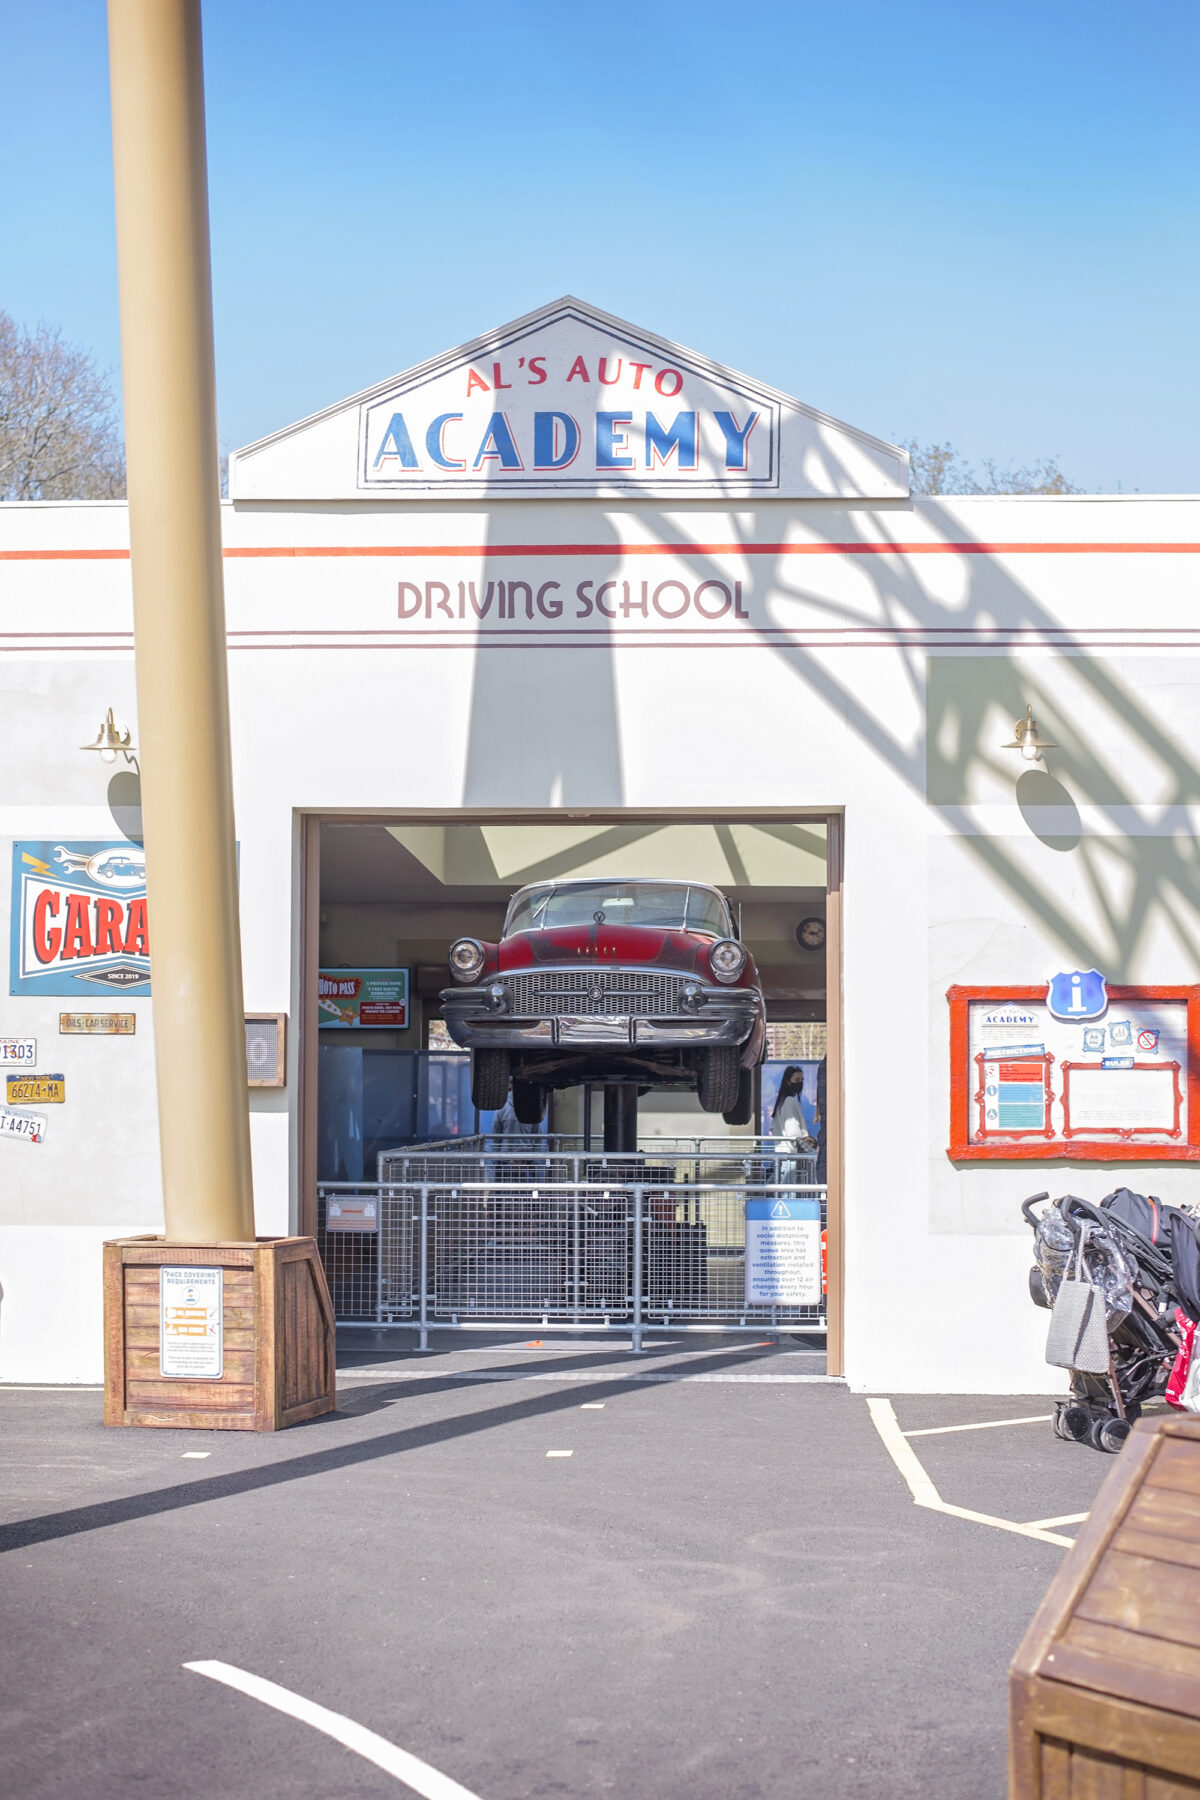 Image shows the open queue area and elevated 1950s car at  Al's Auto Academy Driving School at Tornado Springs in Paultons Park.